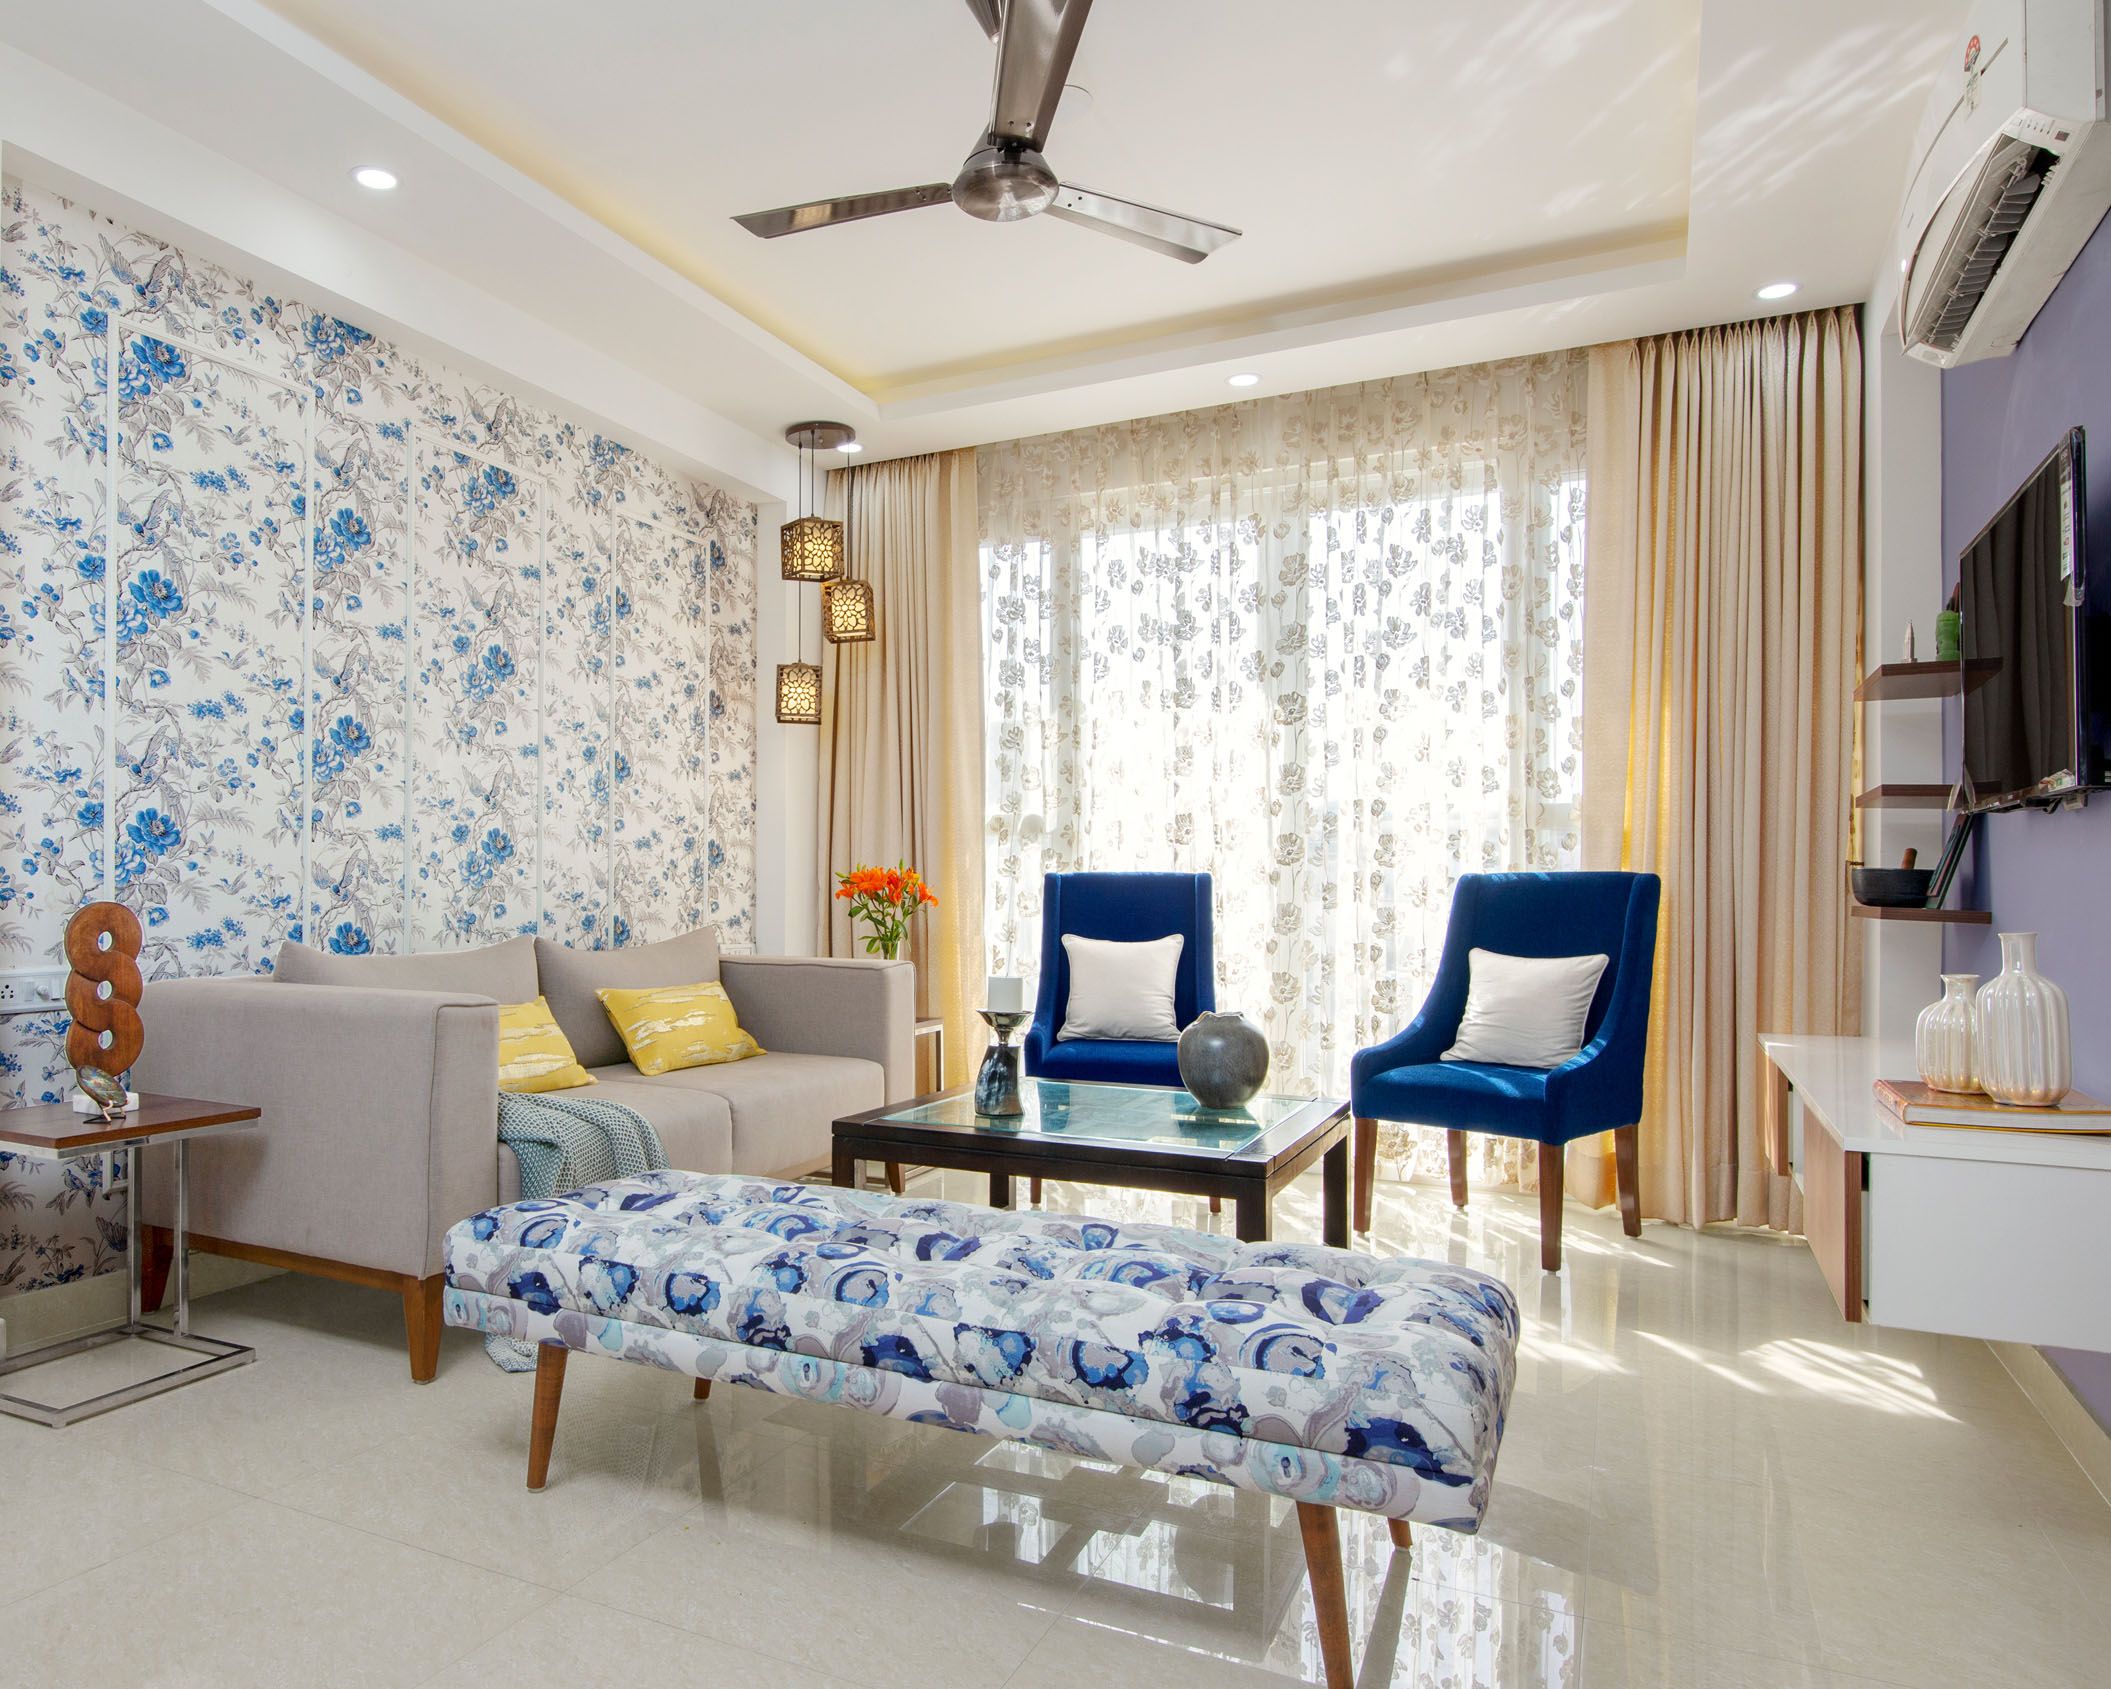 Contemporary Living Room Design With Blue And White Floral Wallpaper